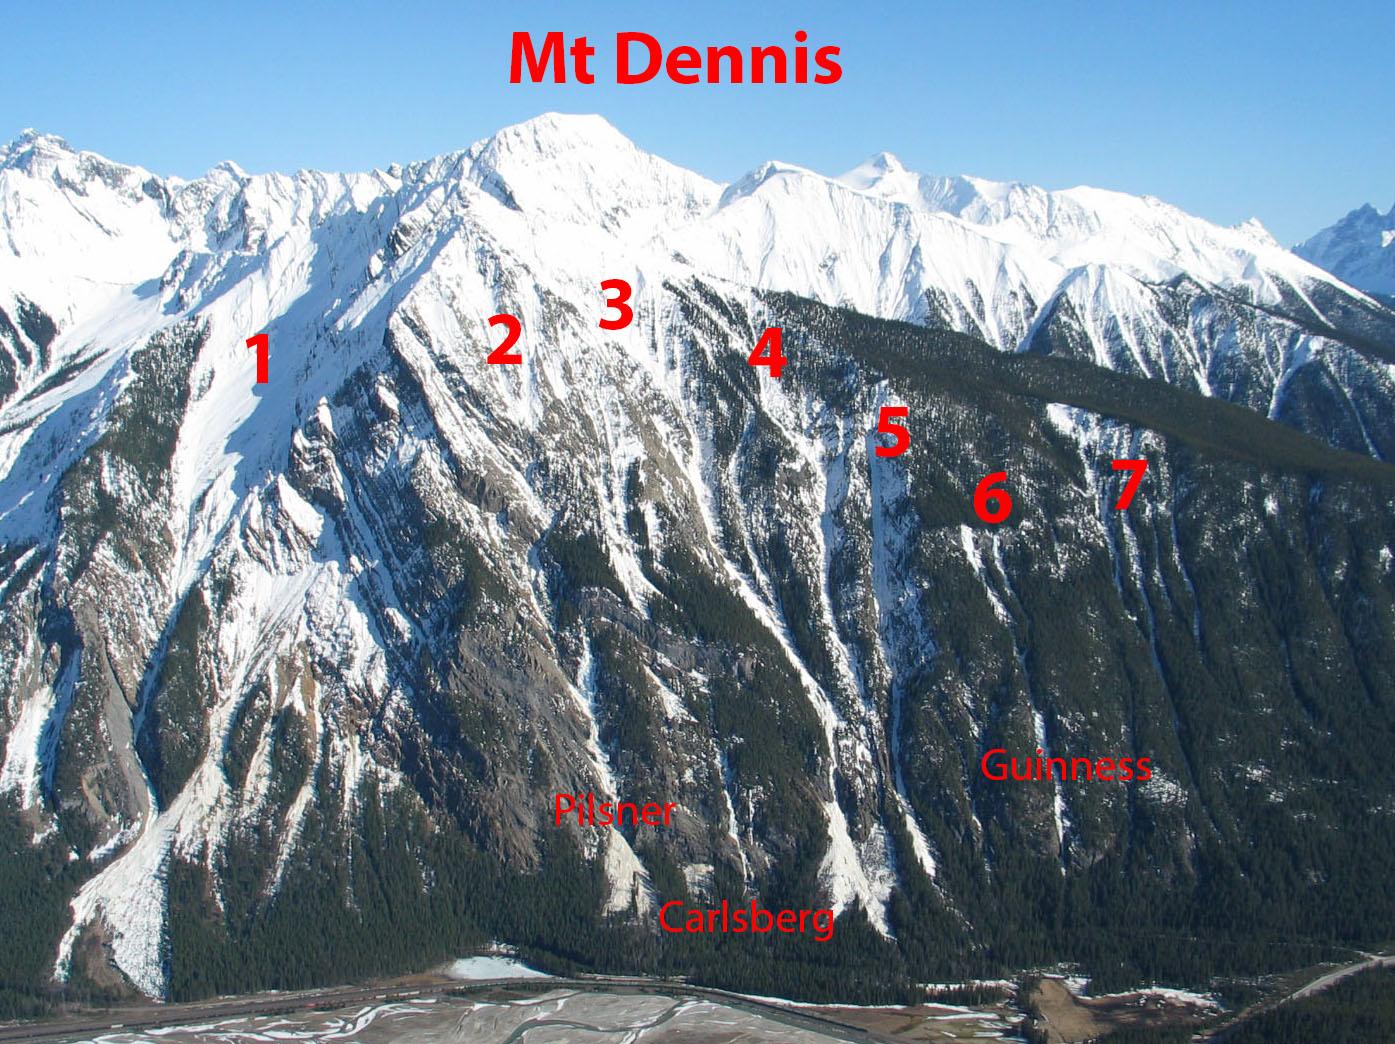 no-access-mt-dennis-ice-climbs-mountain-conditions-report